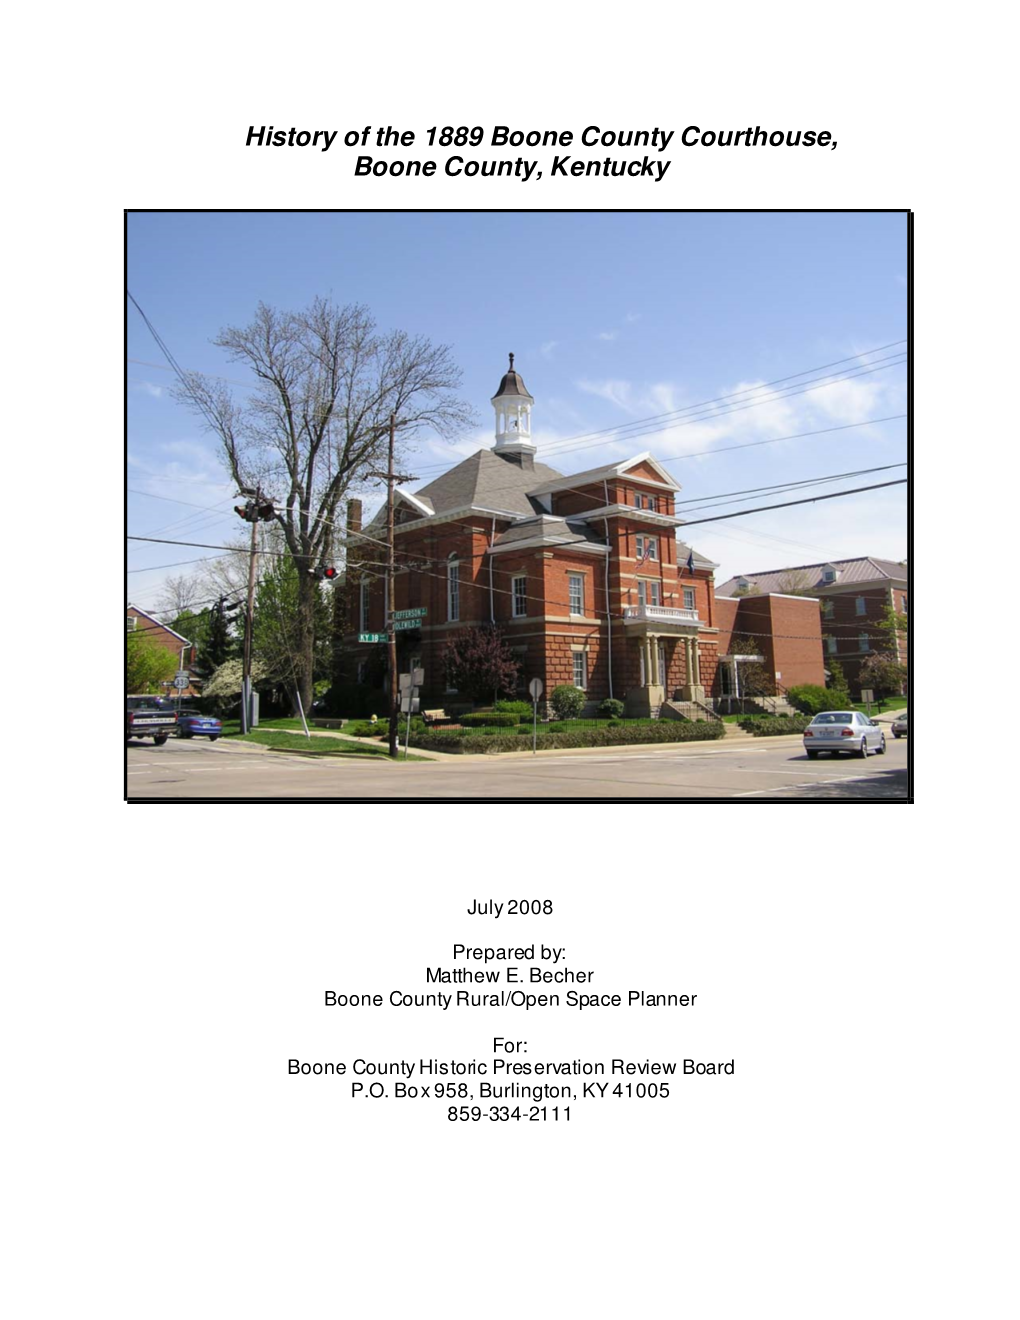 History of the Old Courthouse